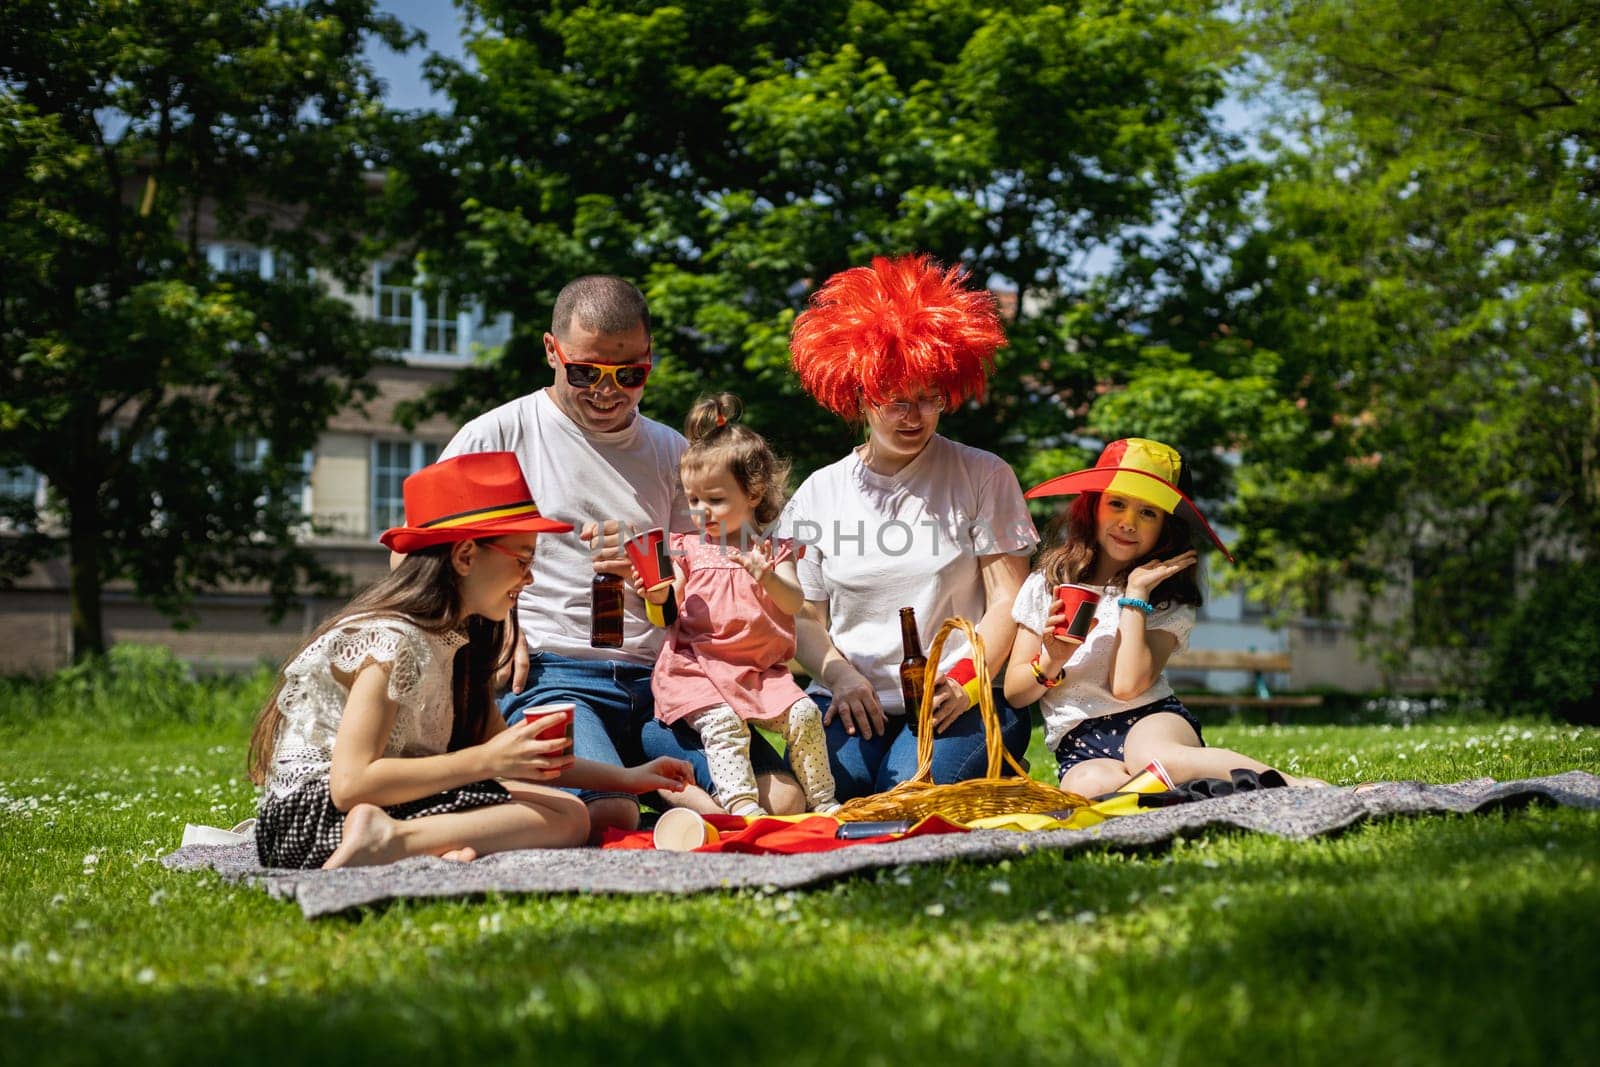 Portrait of beautiful and happy caucasian parents with three children girls celebrating belgium day at a picnic in a city park on a sunny summer day, close-up view from below.